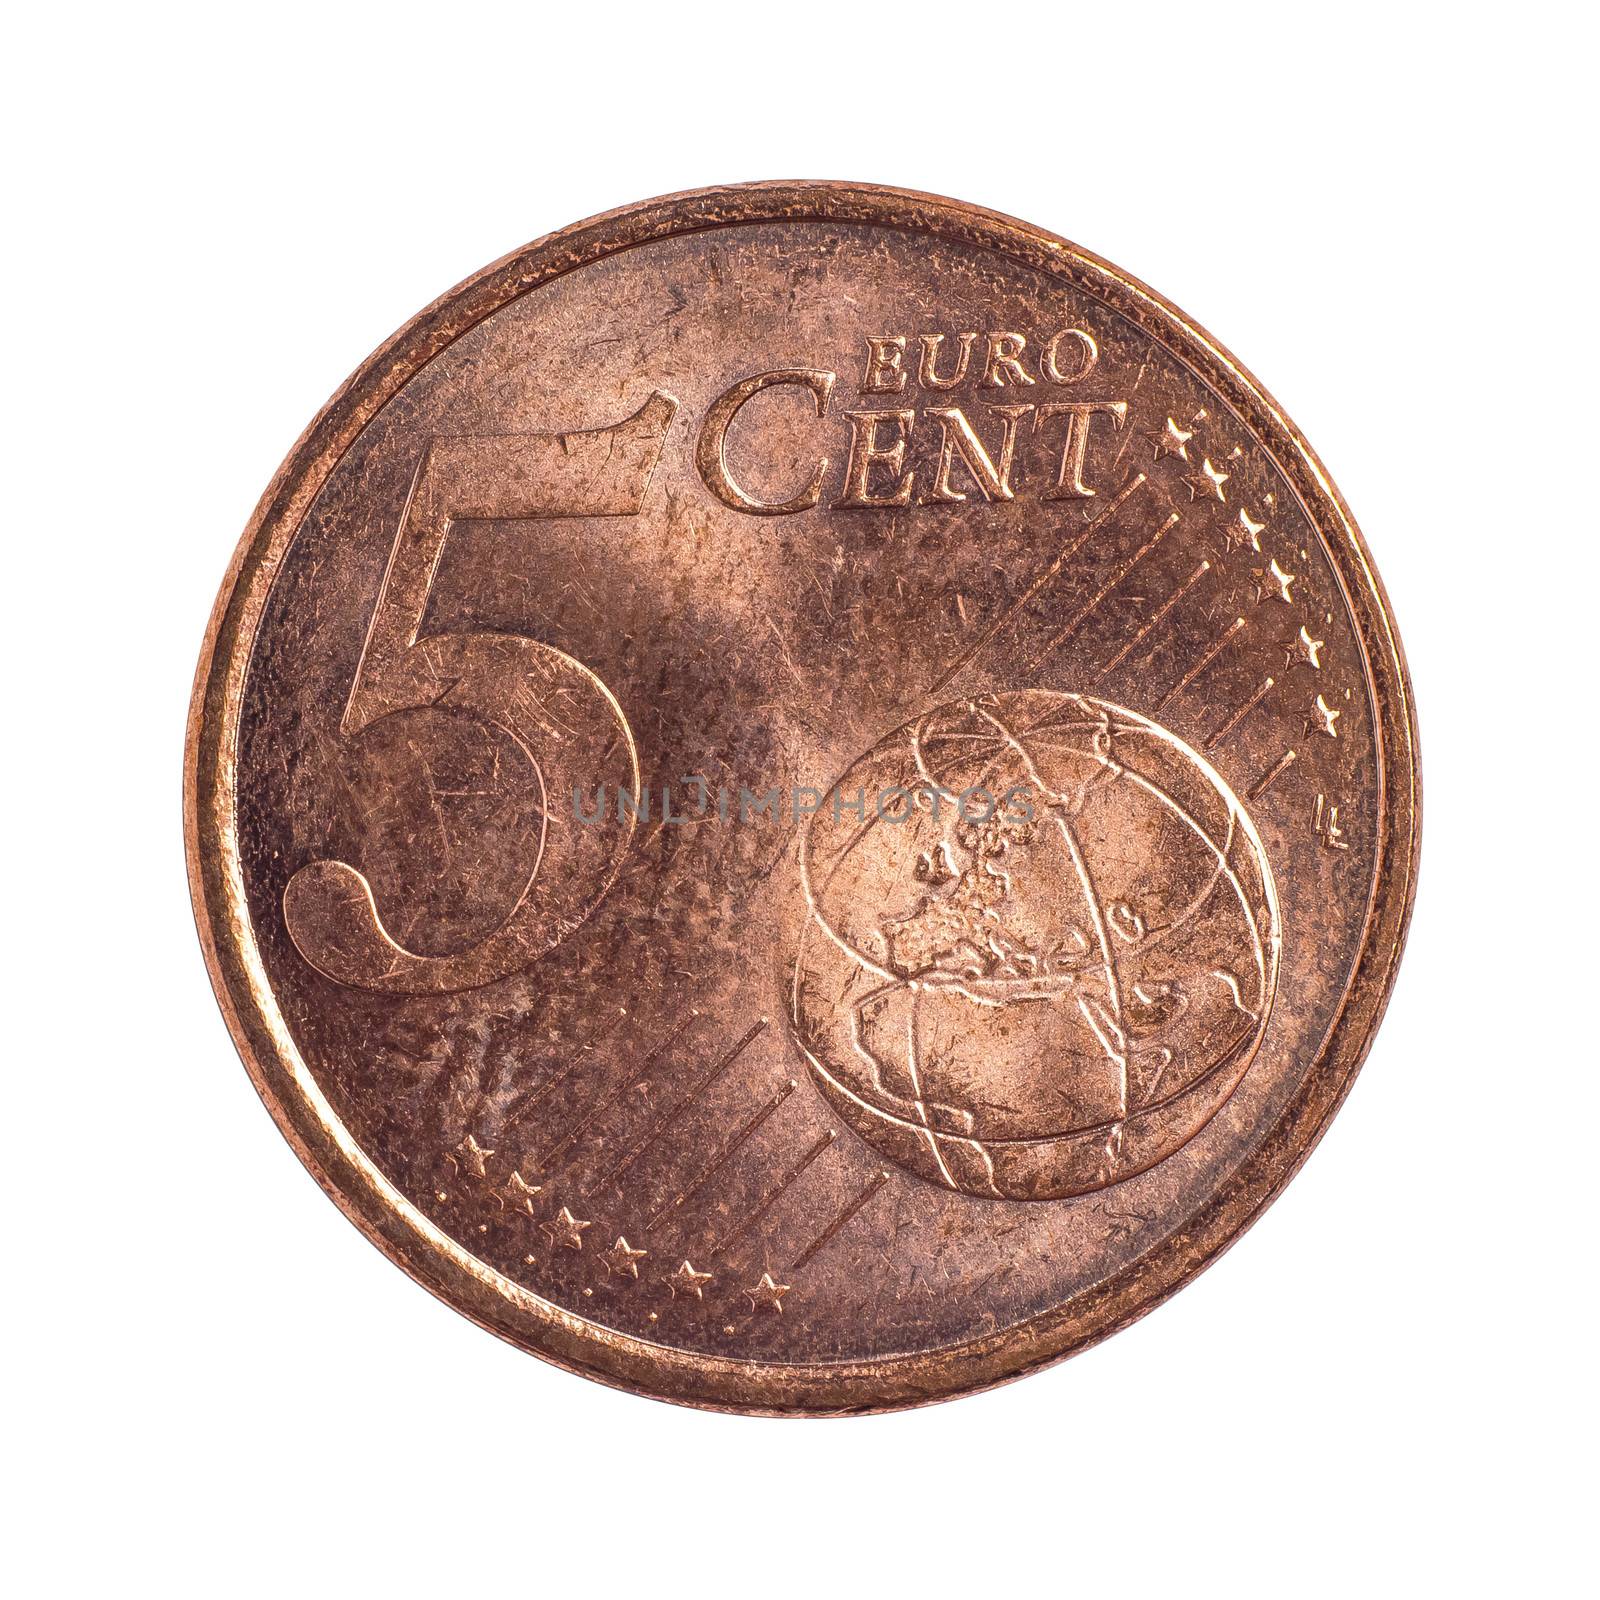 Detailed shoot of five euro cents